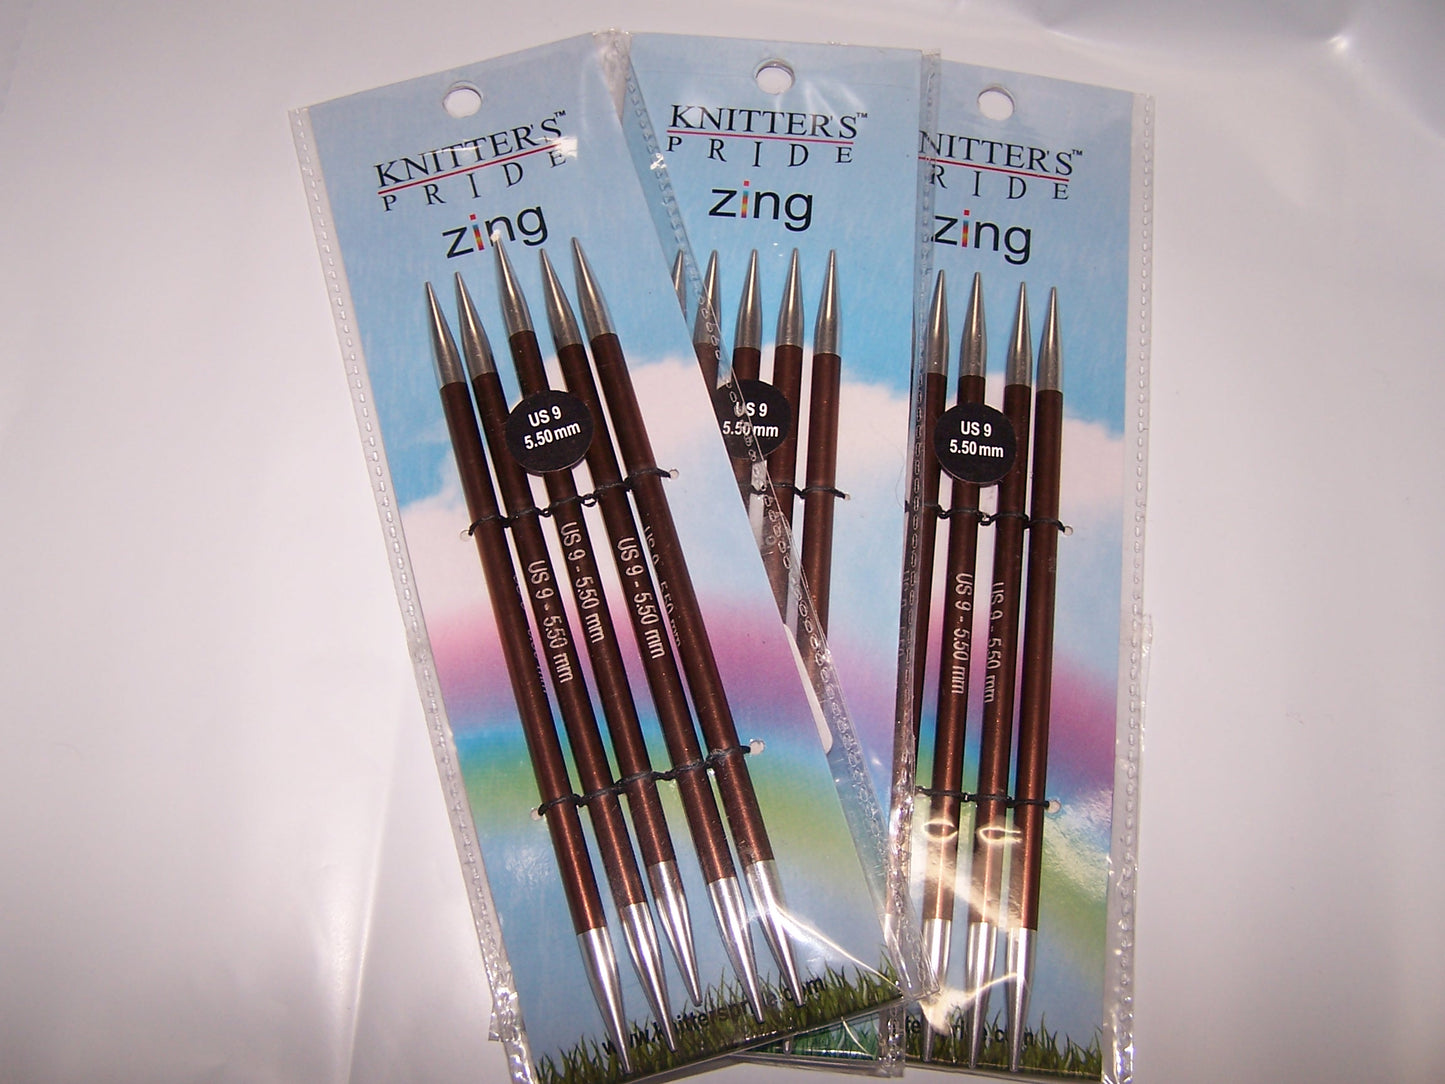 Knitters Pride Zing US 9 (5.5mm) size 6 inch DPN's